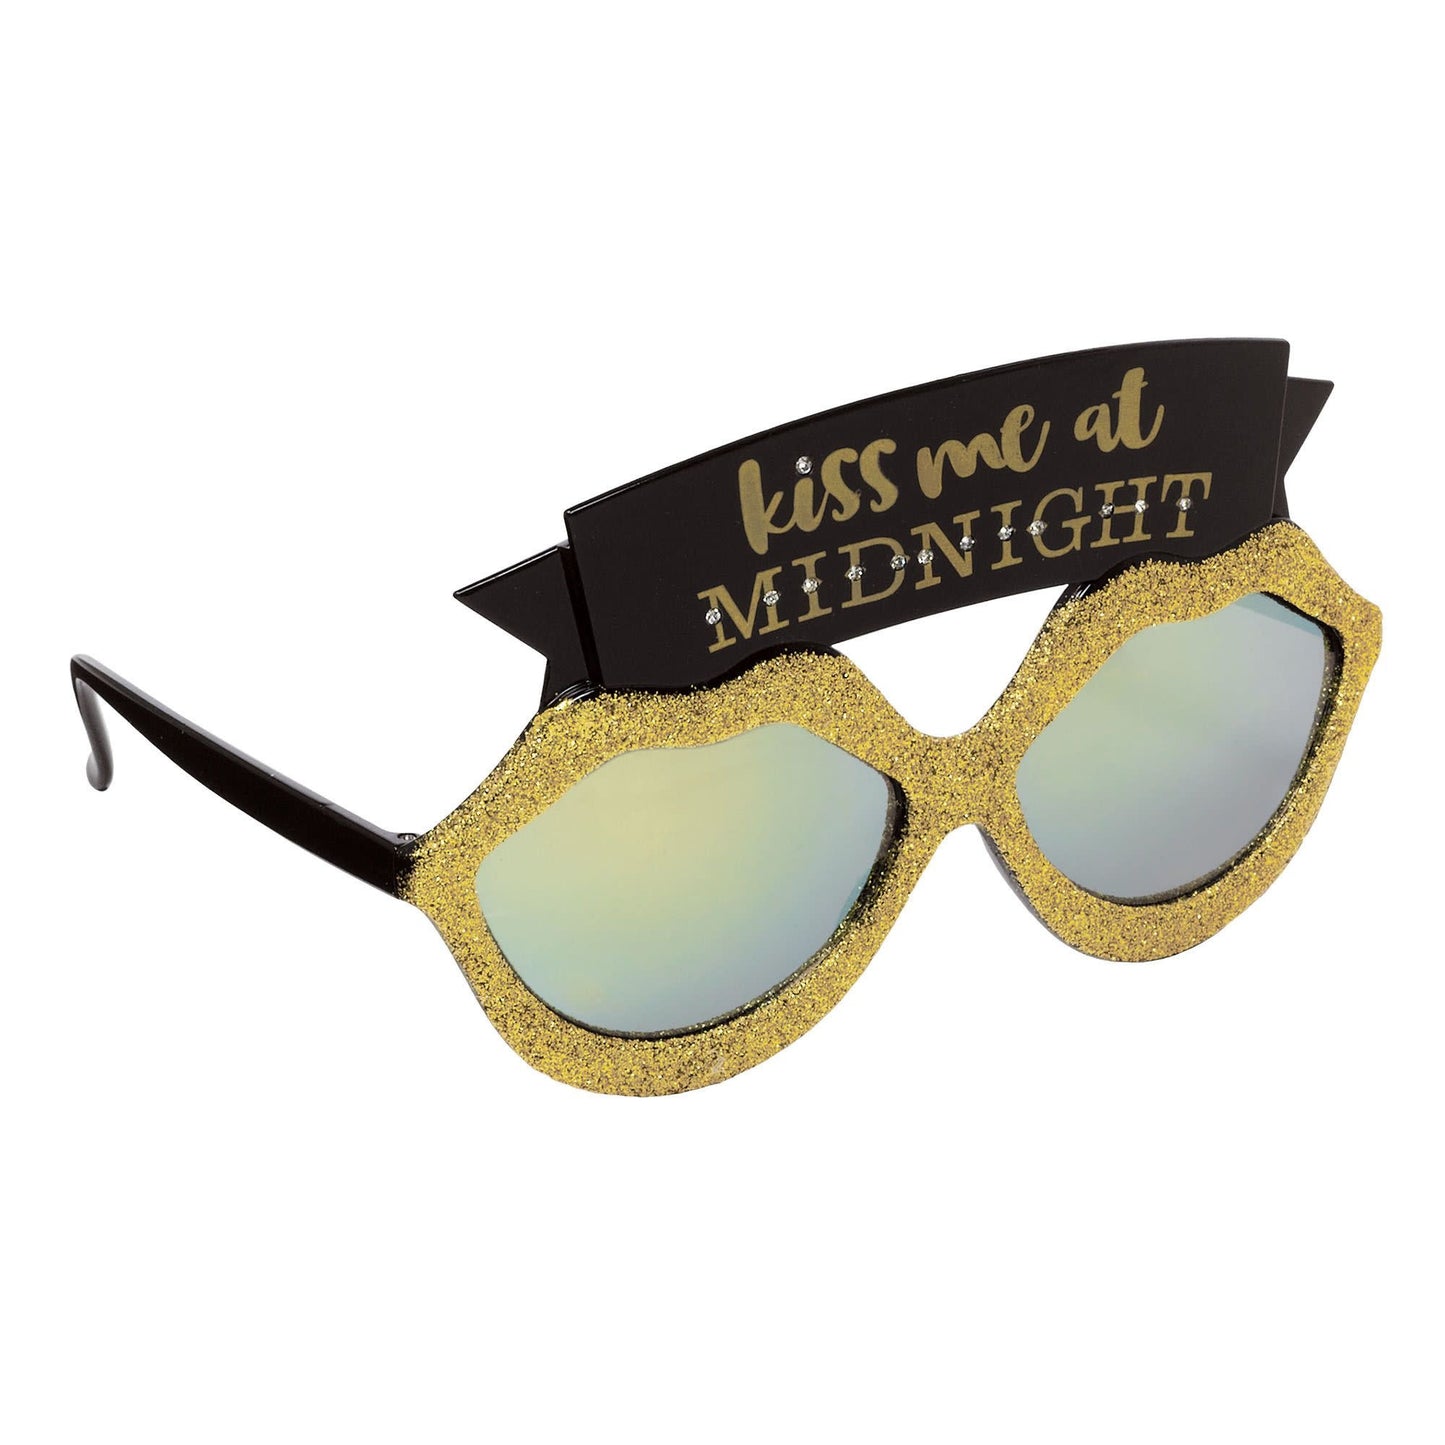 New Years "Kiss Me At Midnight" Glasses